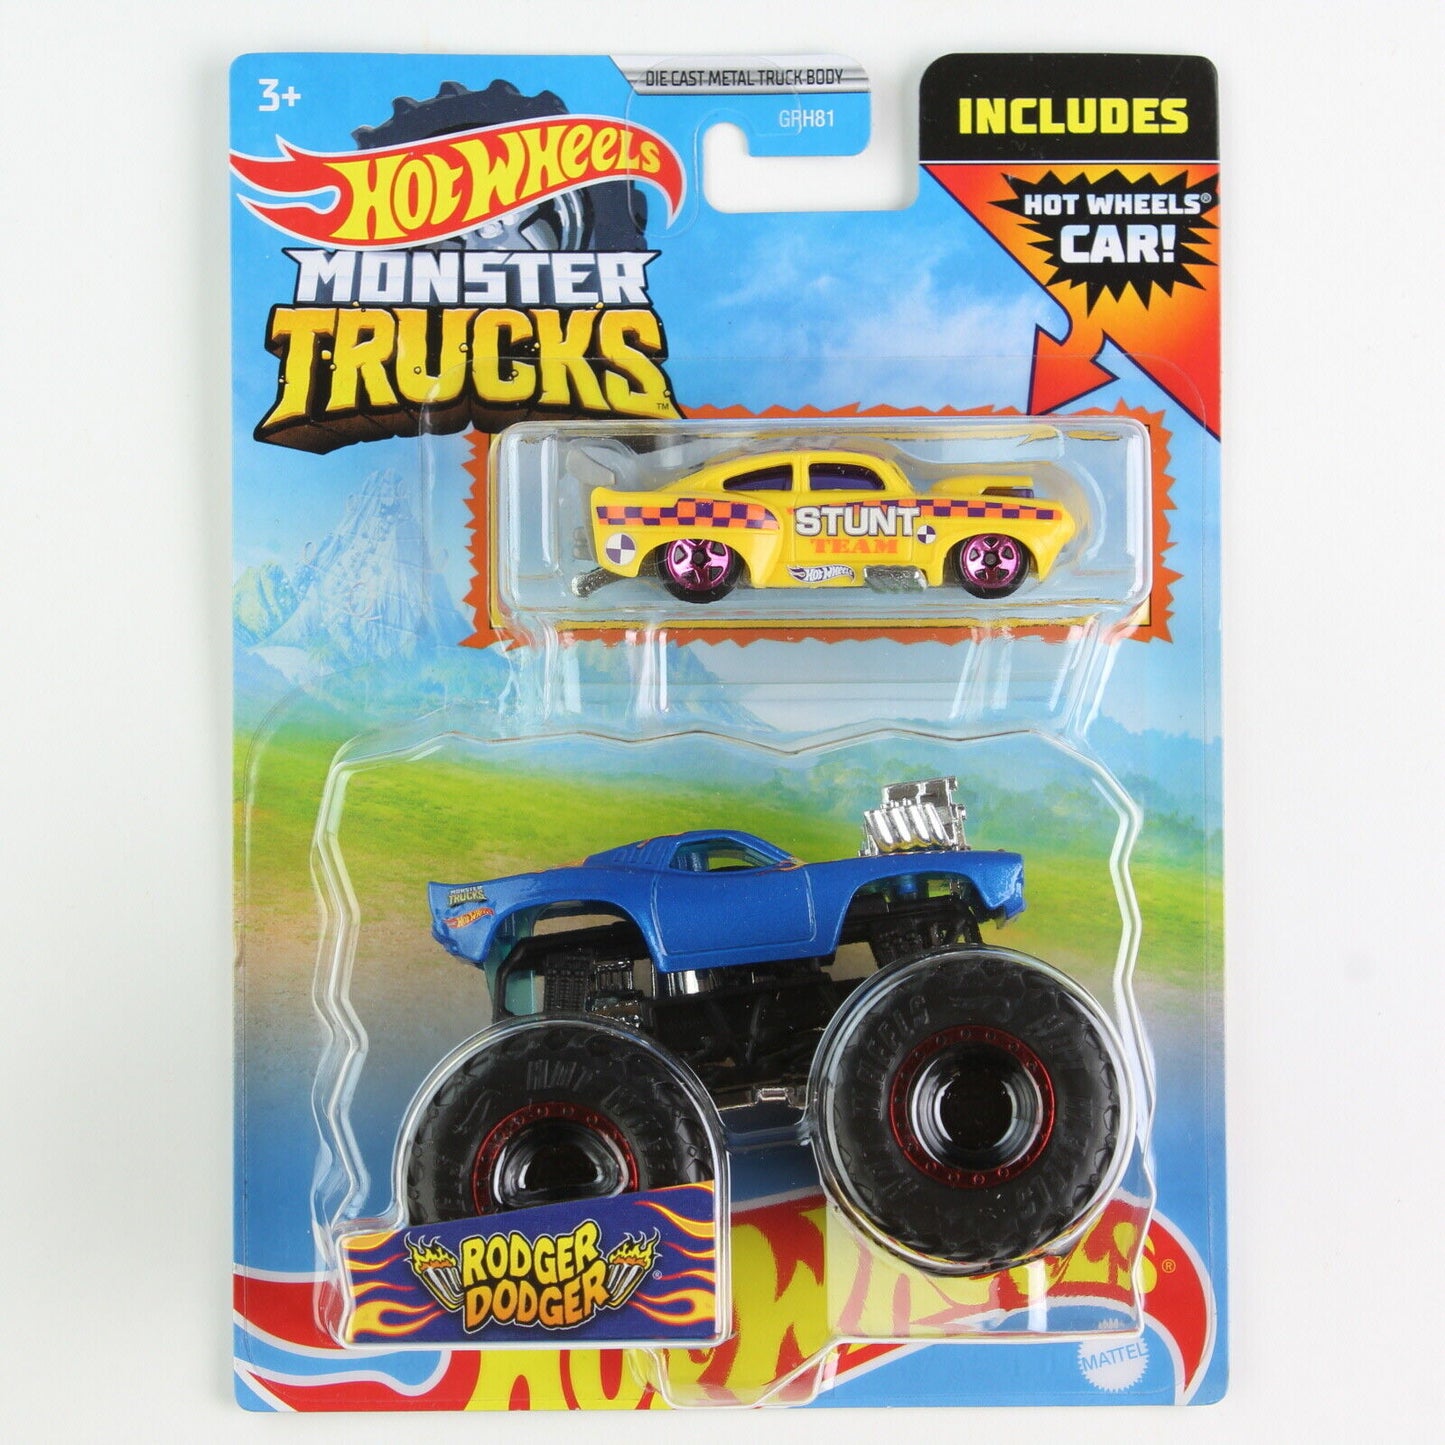 Hot Wheels Monster Trucks 1:64 Scale With Crushed Die-Cast Car (Styles Vary)